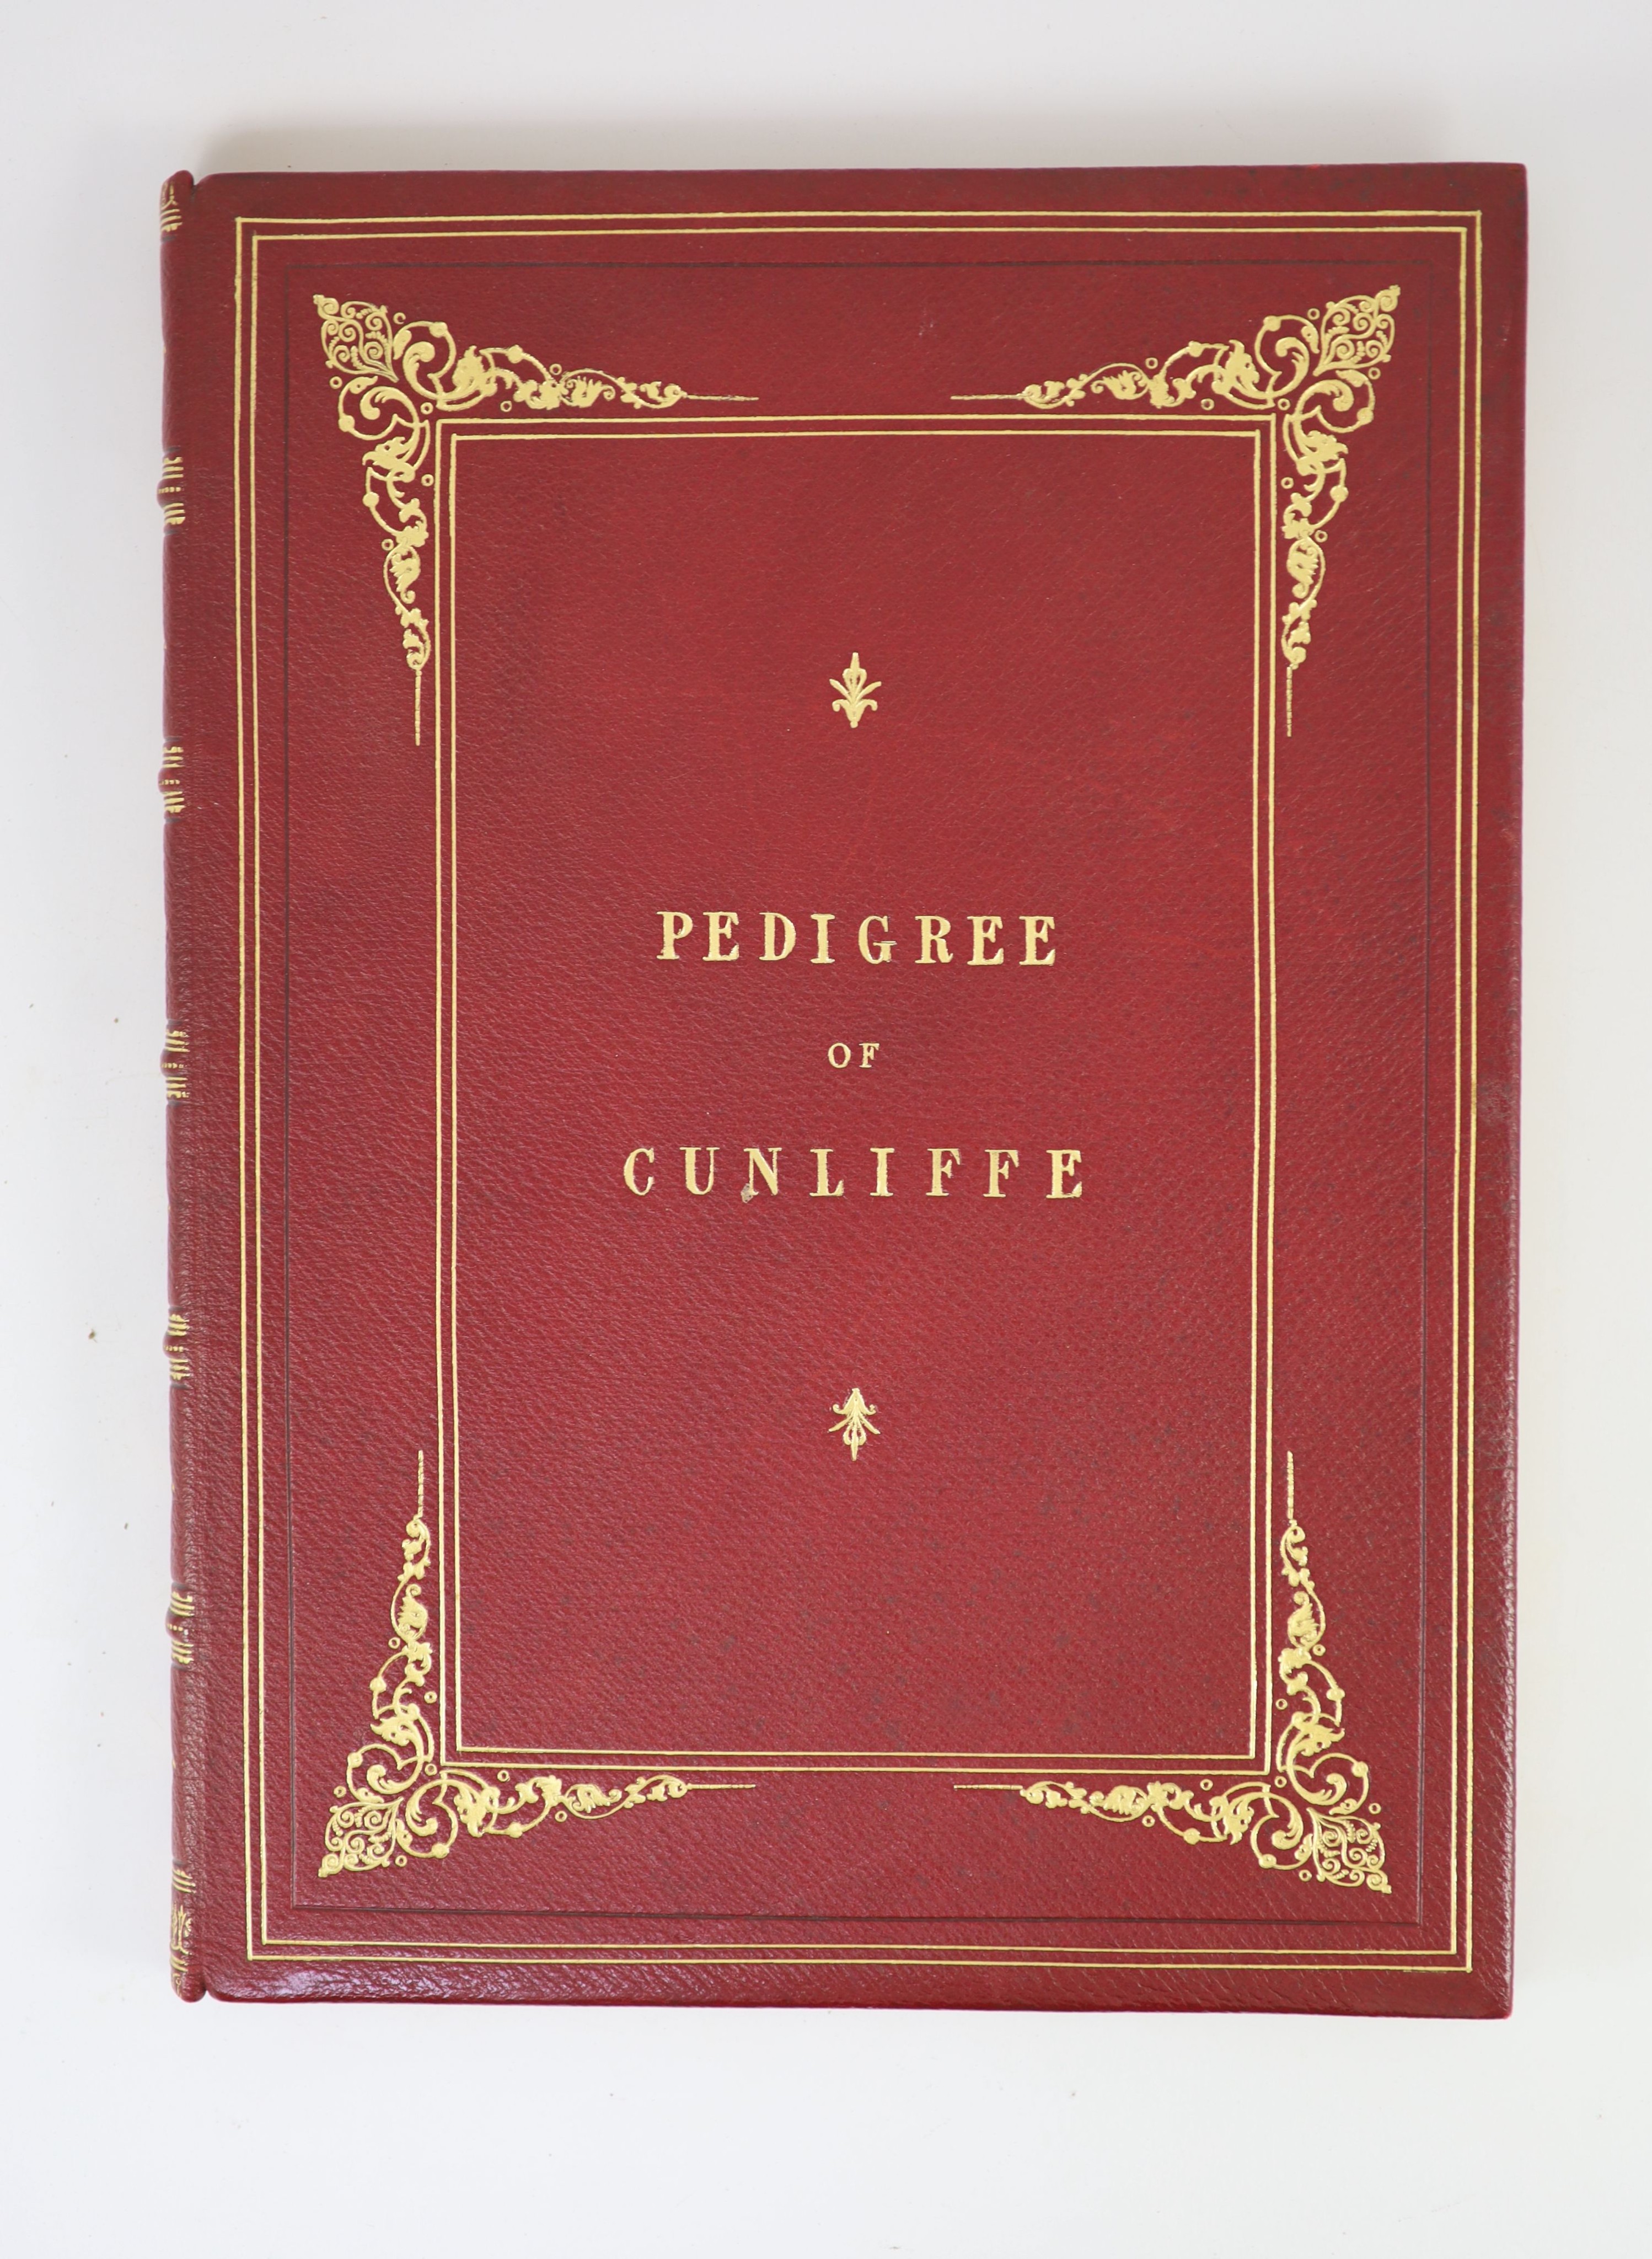 [Genealogy.] Scott-Gatty, Sir Alfred Scott. (A Manuscript) Pedigree of Cunliffe. Folio, 1910., Full red morocco binding by E. Riley and Son, gilt, with inner gilt dentelles